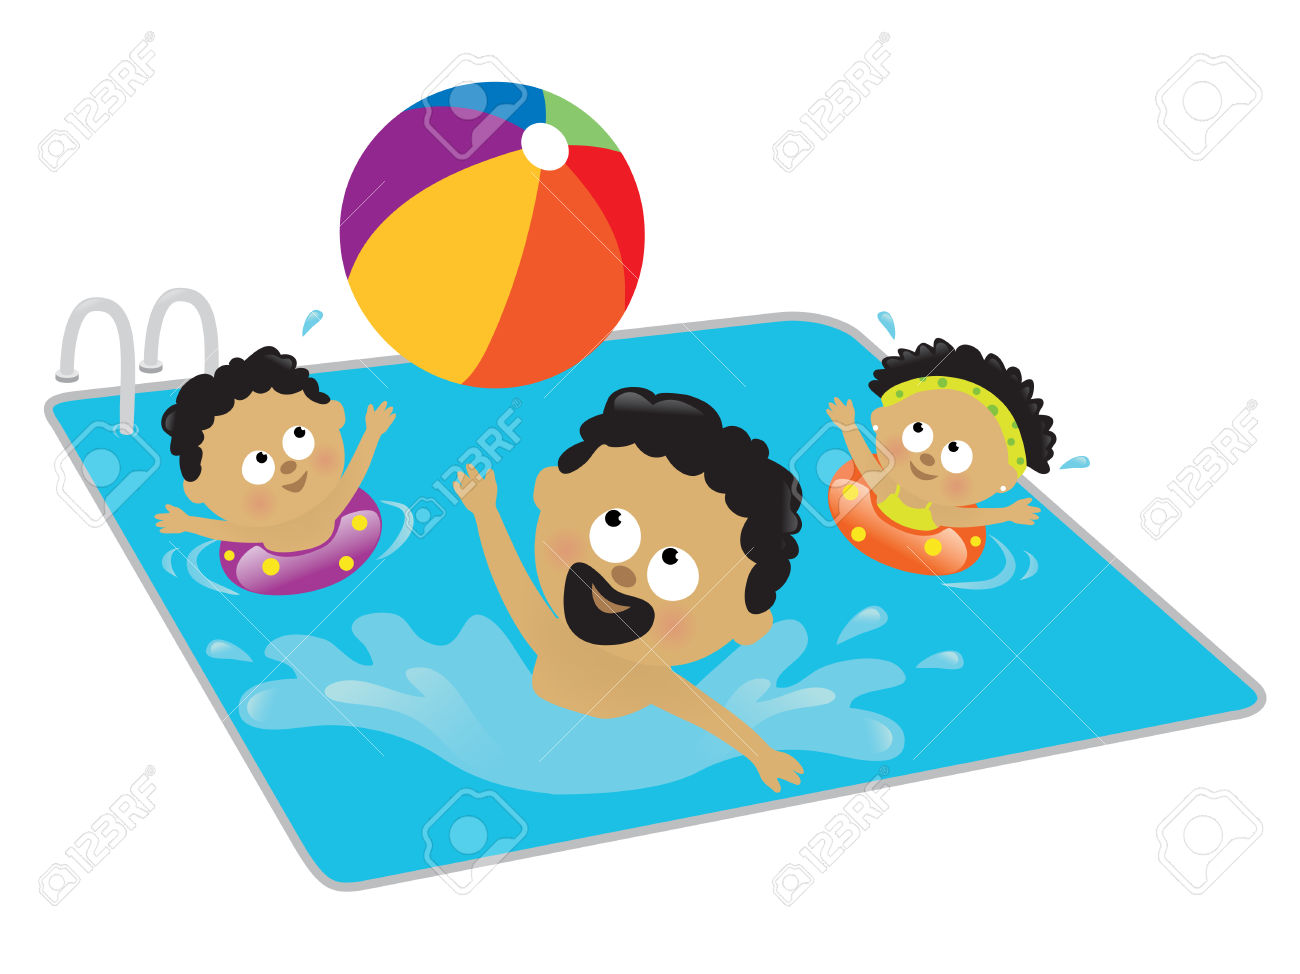 clipart child swimming pool